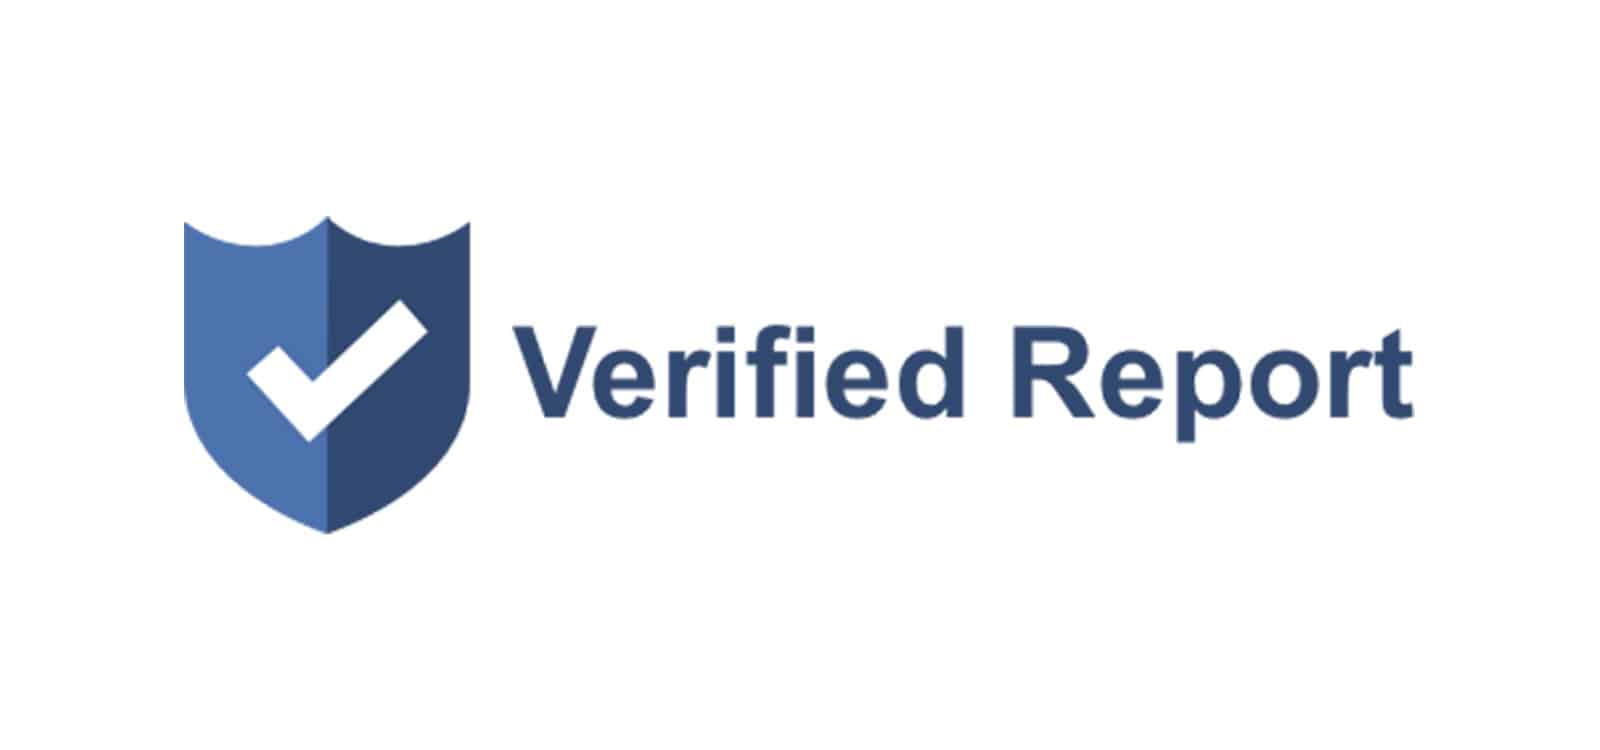 What are Verified Reports and Why Should You Care? | Stockpile Reports